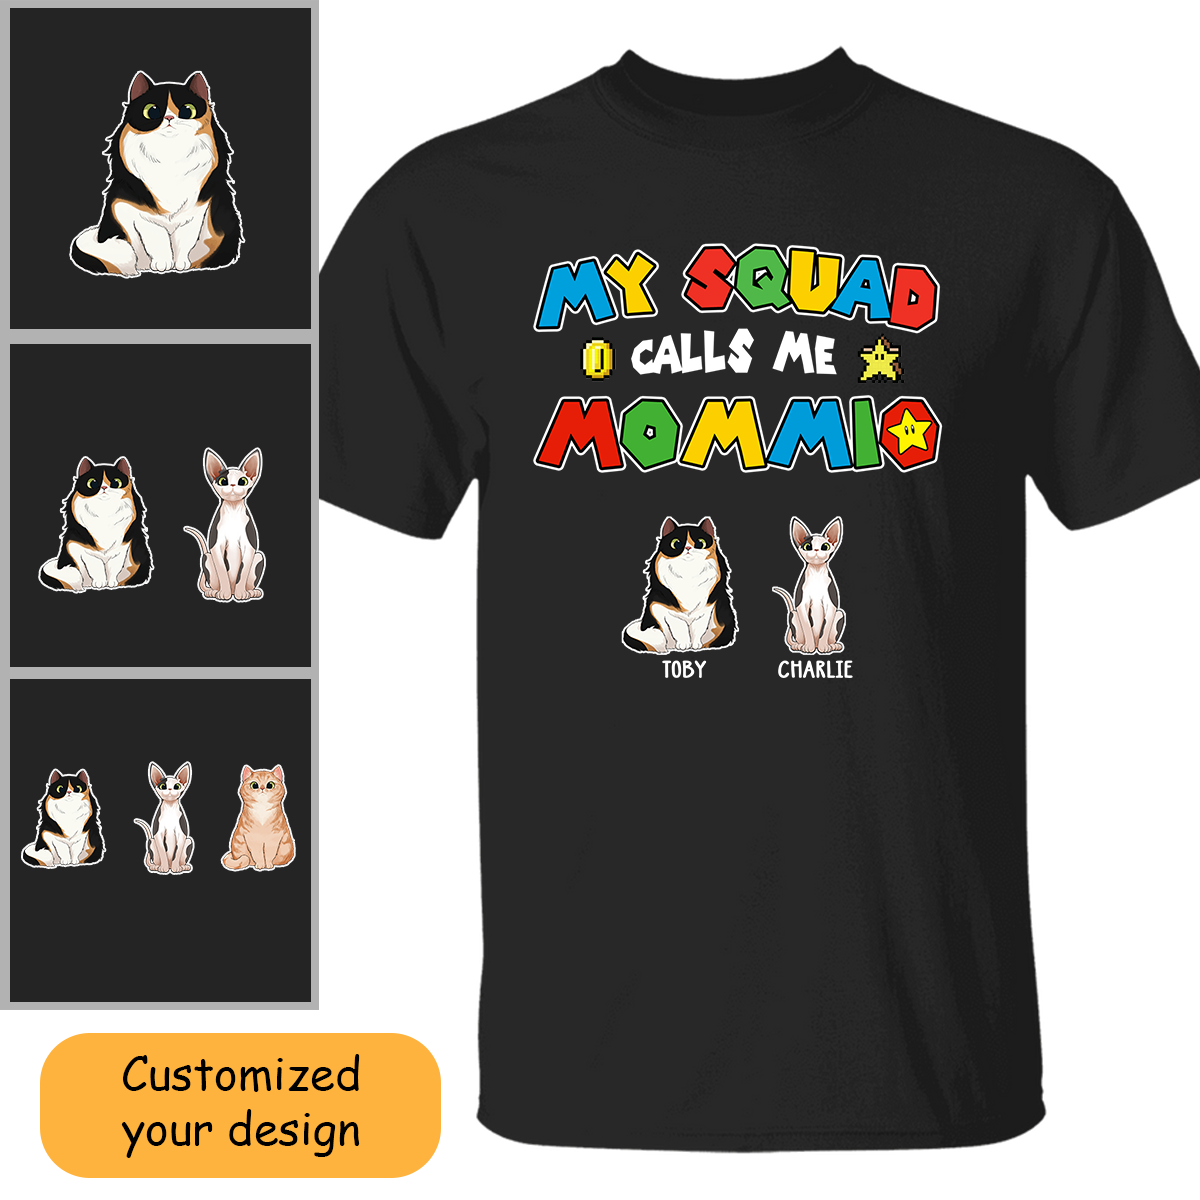 Customized Cat Dad Shirt My Squad Calls Me Daddio For Dad, For Father, Grandpa, For Husband, Father's Day Gift, For Cat Lovers